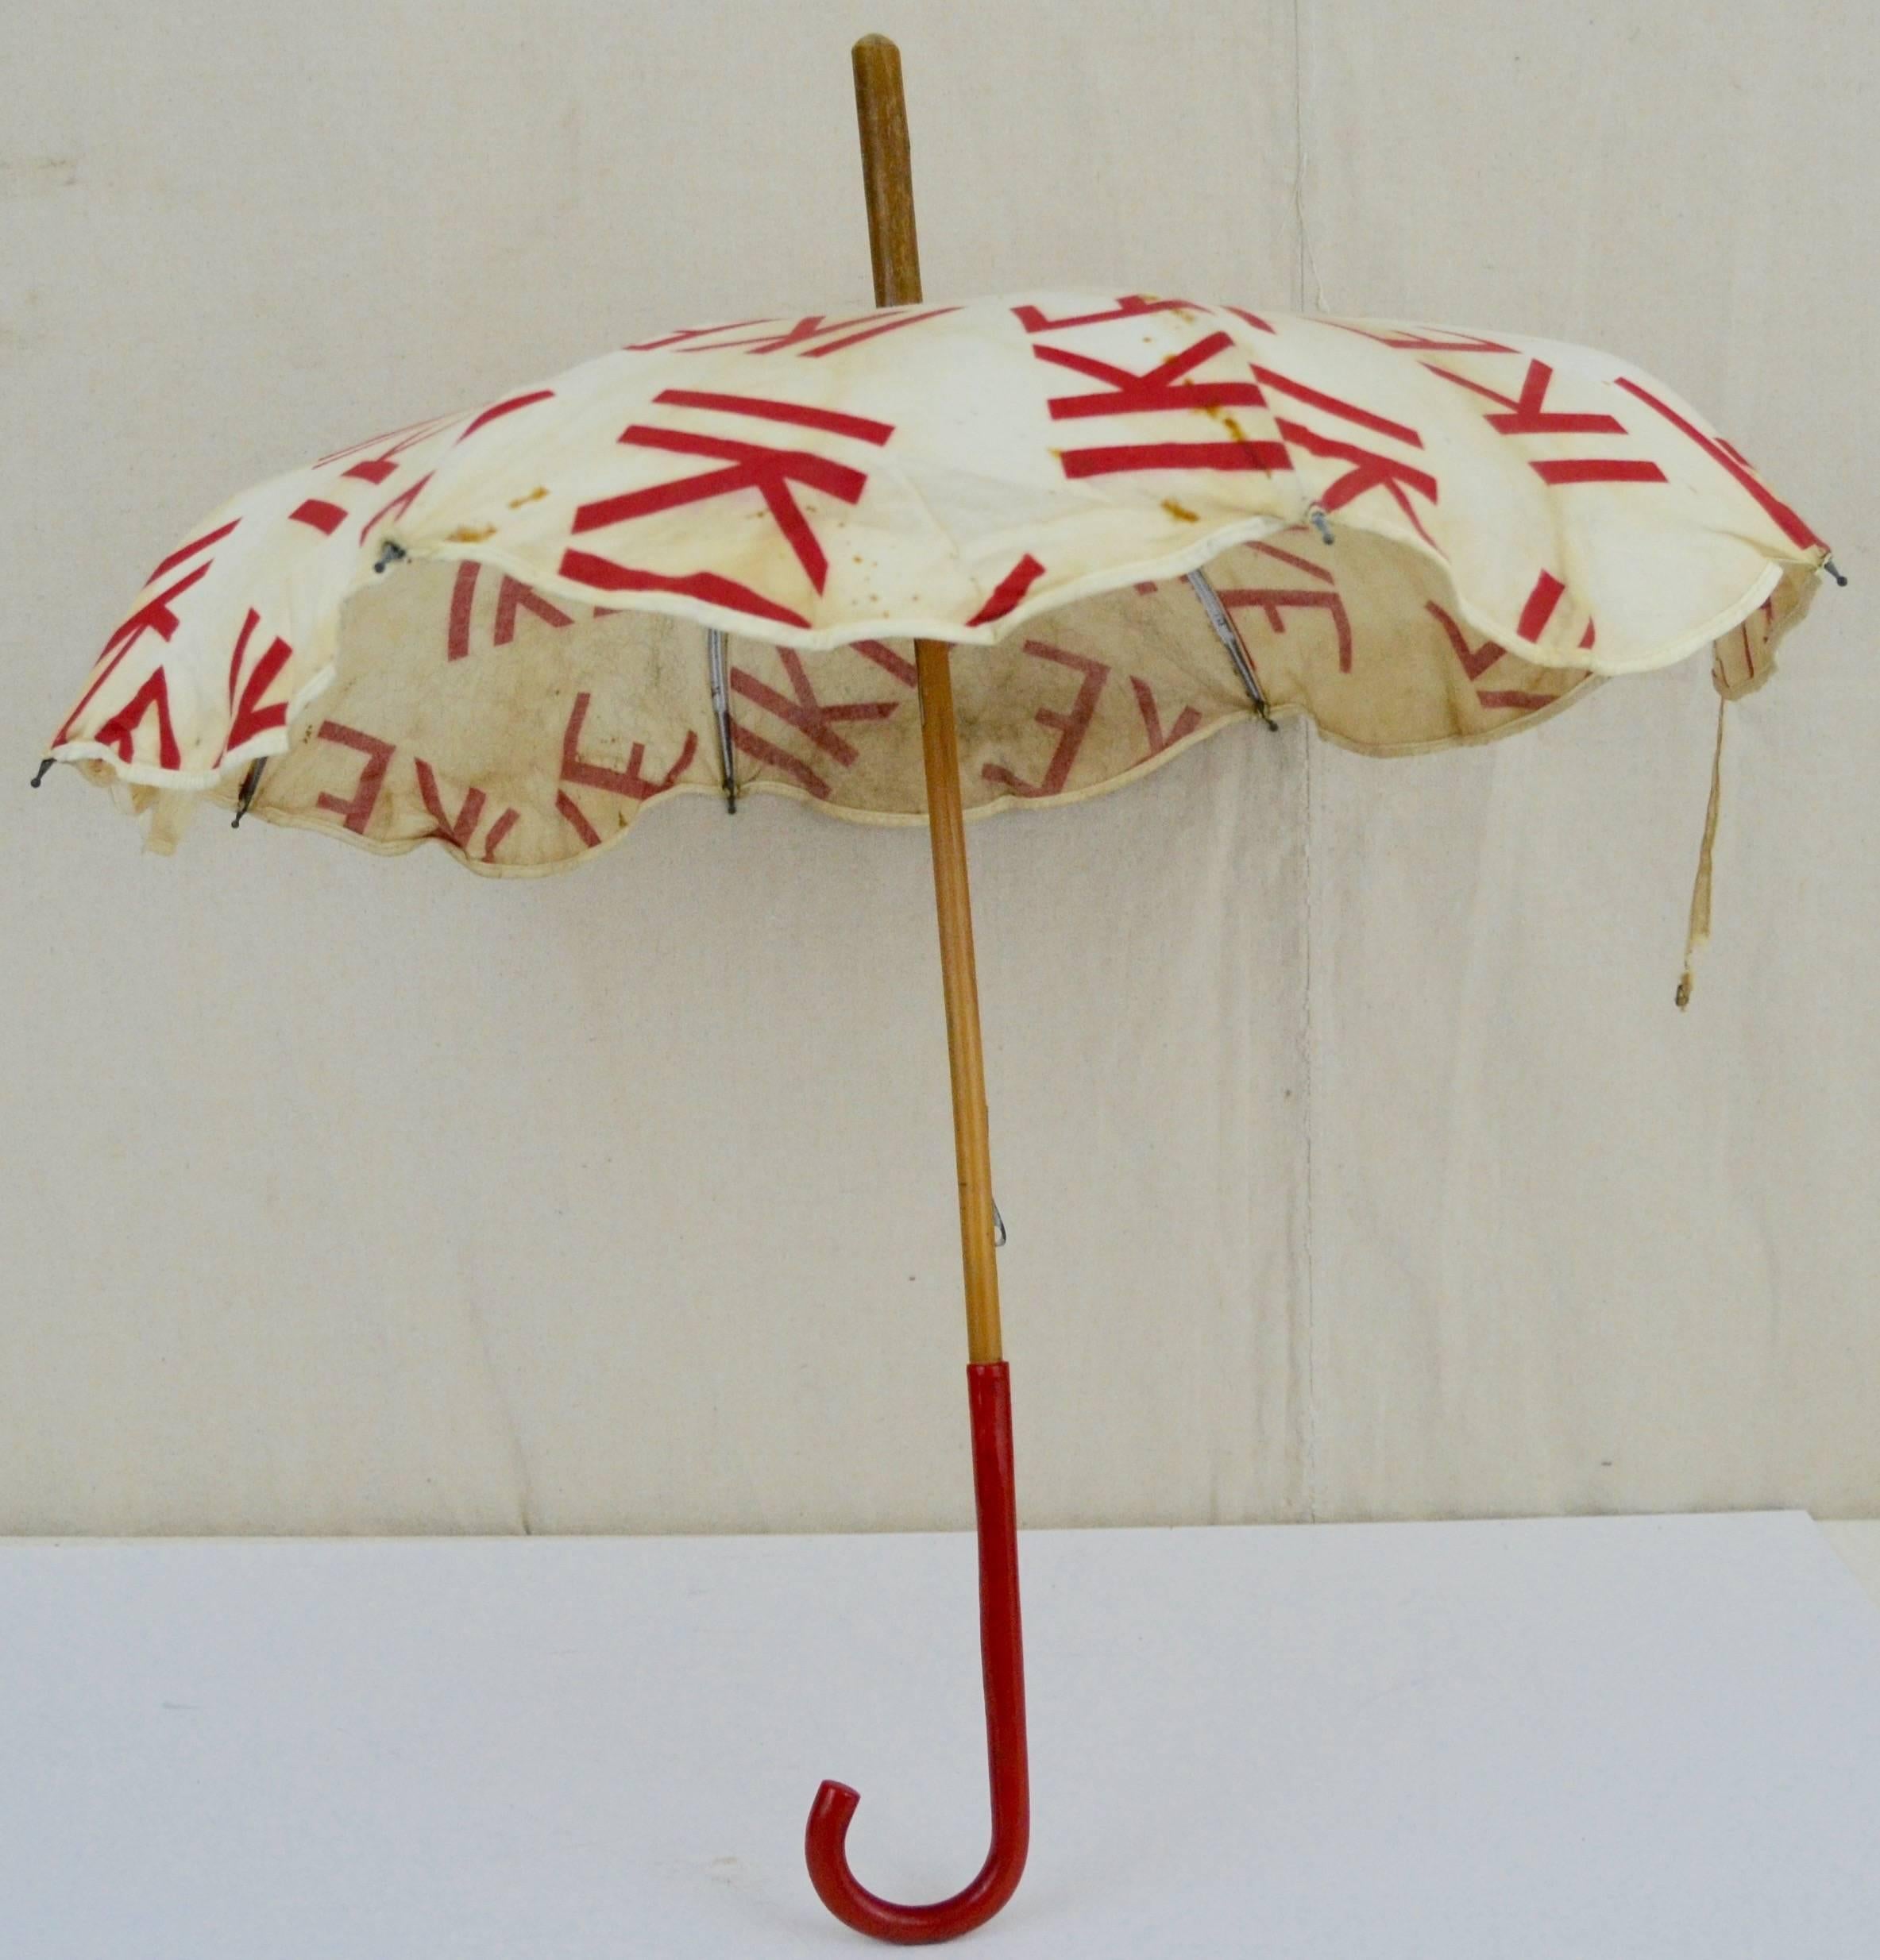 Printed cotton 25.5 in. diameter parasol carried by "Ike Girls" at "Eisenhower Bandwagon" events during the 1956 presidential race. The cloth itself is strong but has foxing and staining and a tear on the strap. It has a red